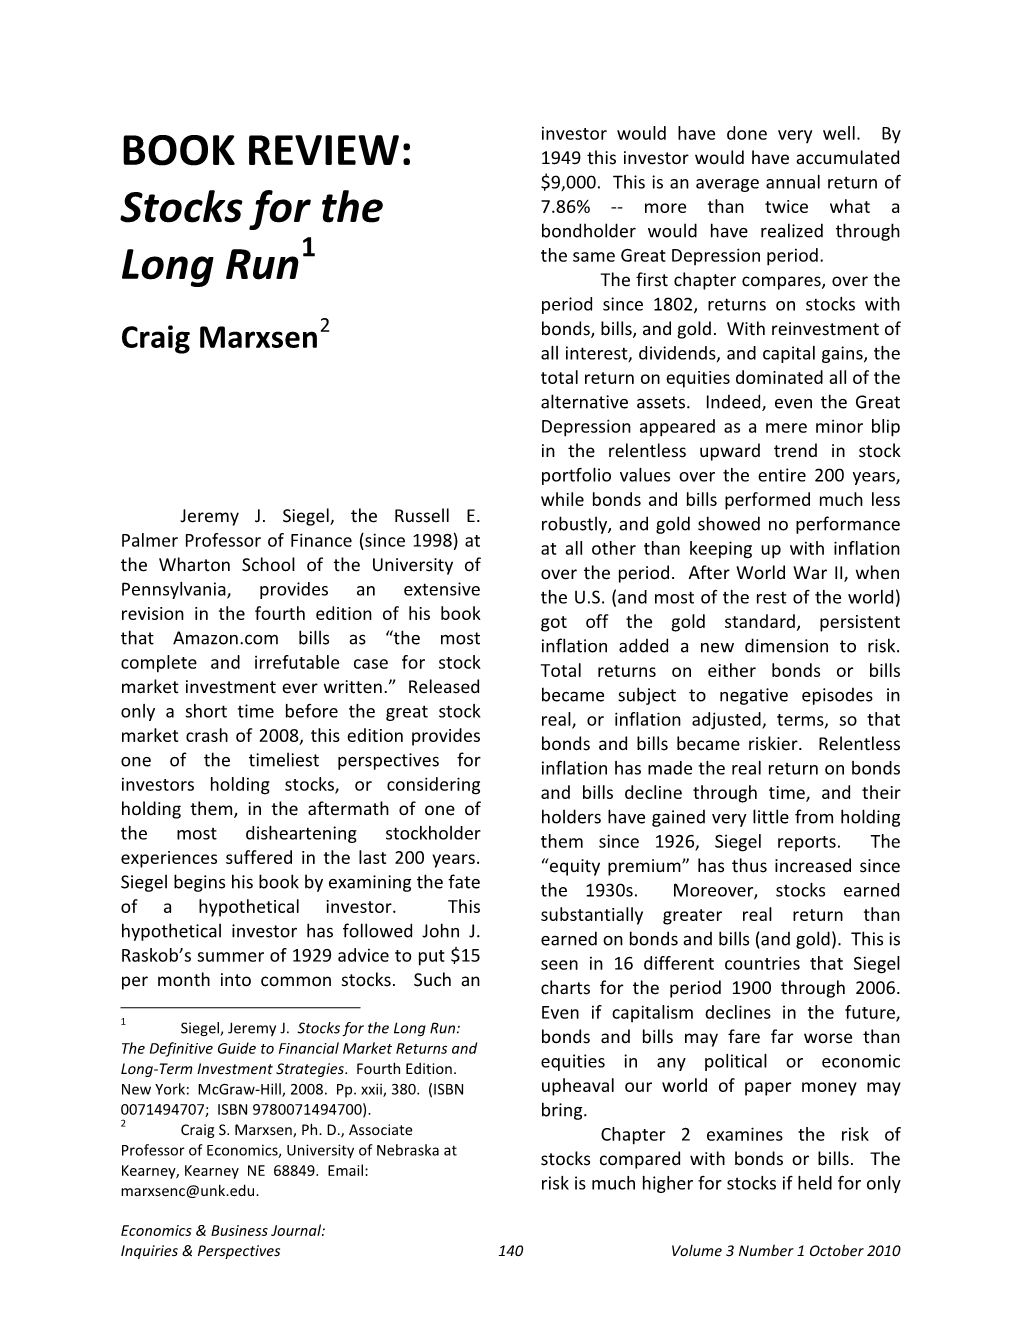 Stocks for the Long Run: Bonds and Bills May Fare Far Worse Than the Definitive Guide to Financial Market Returns and Long-Term Investment Strategies